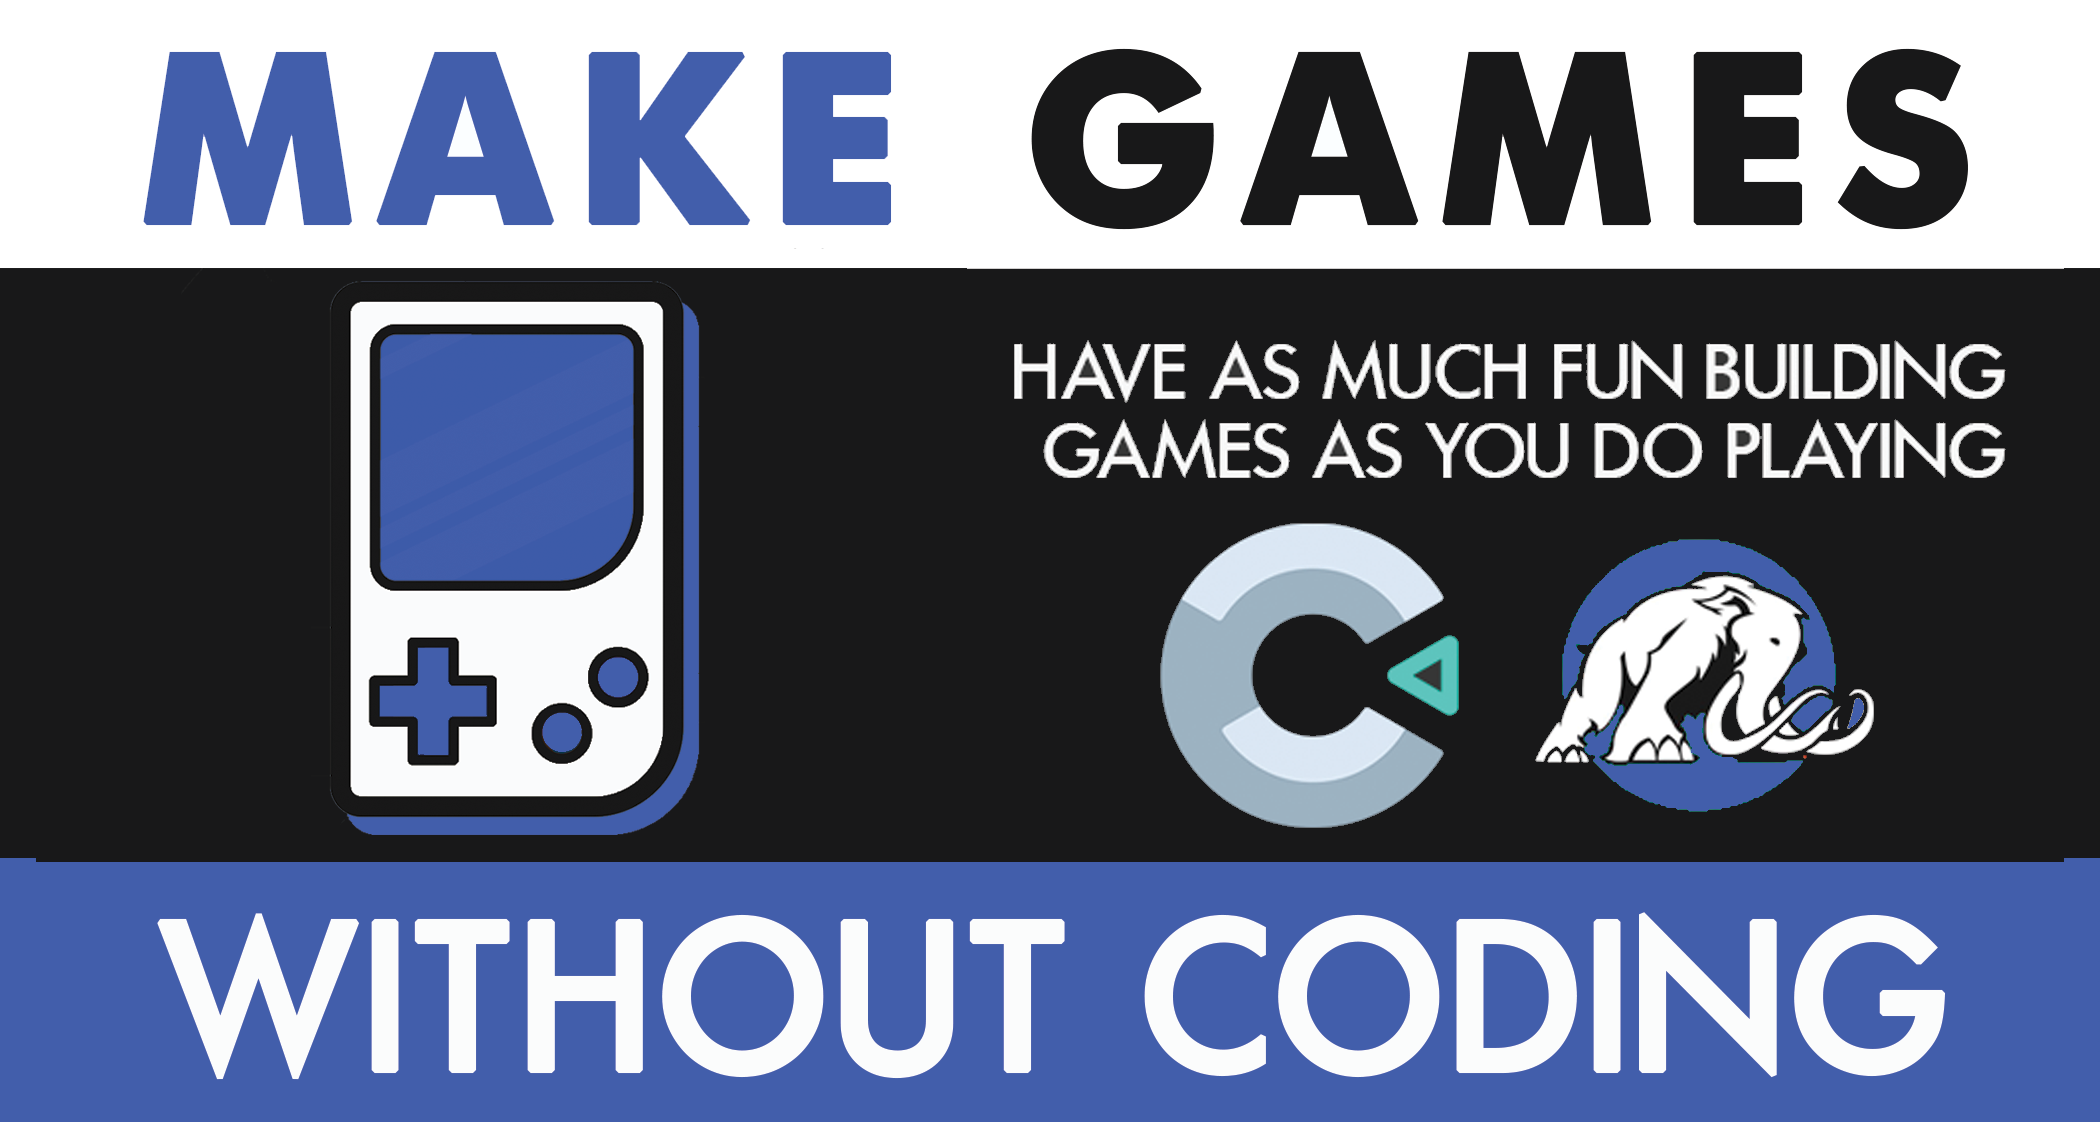 The Complete Game Developer Course - Build 90 Games in Construct 2 and